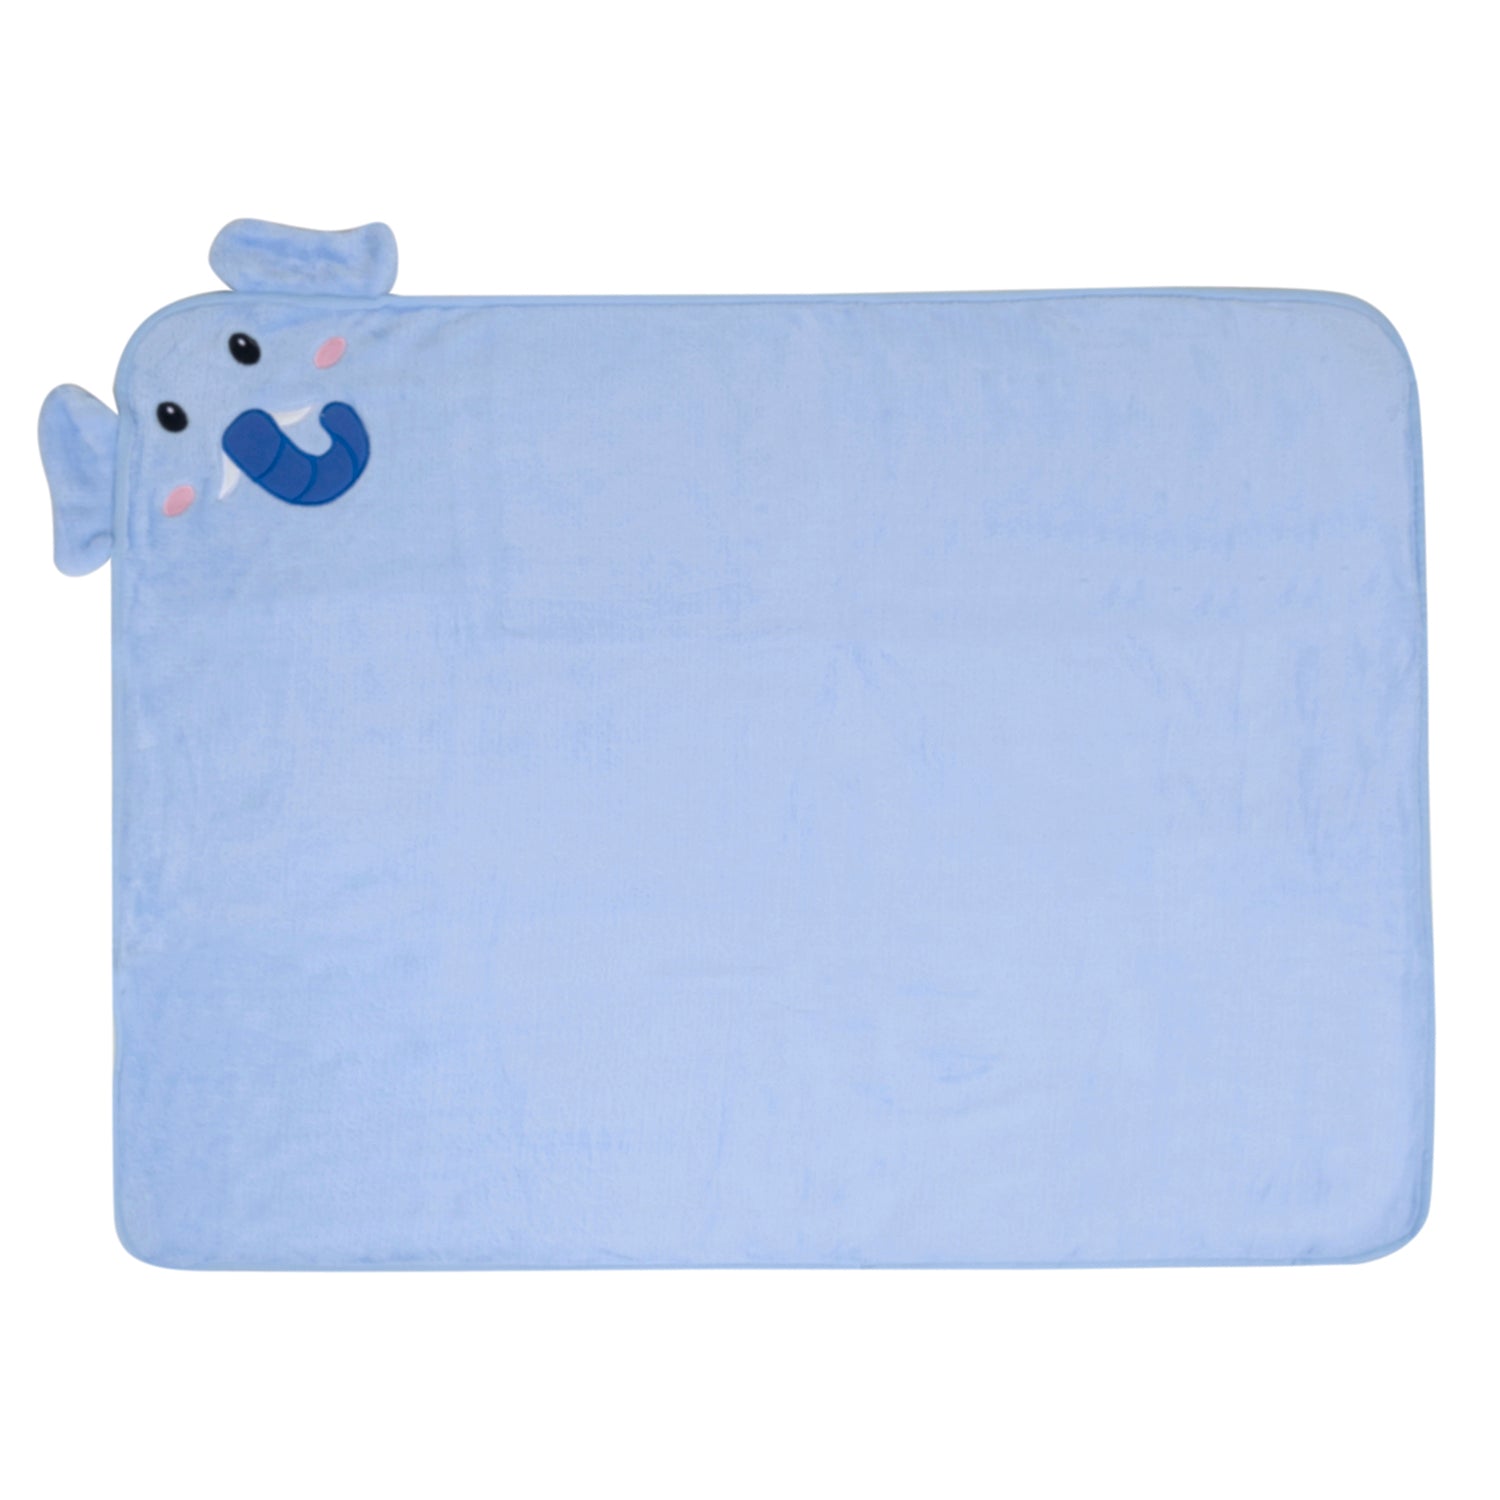 Baby Moo Elephant Applique with 3D Ears Soft Blanket - Blue